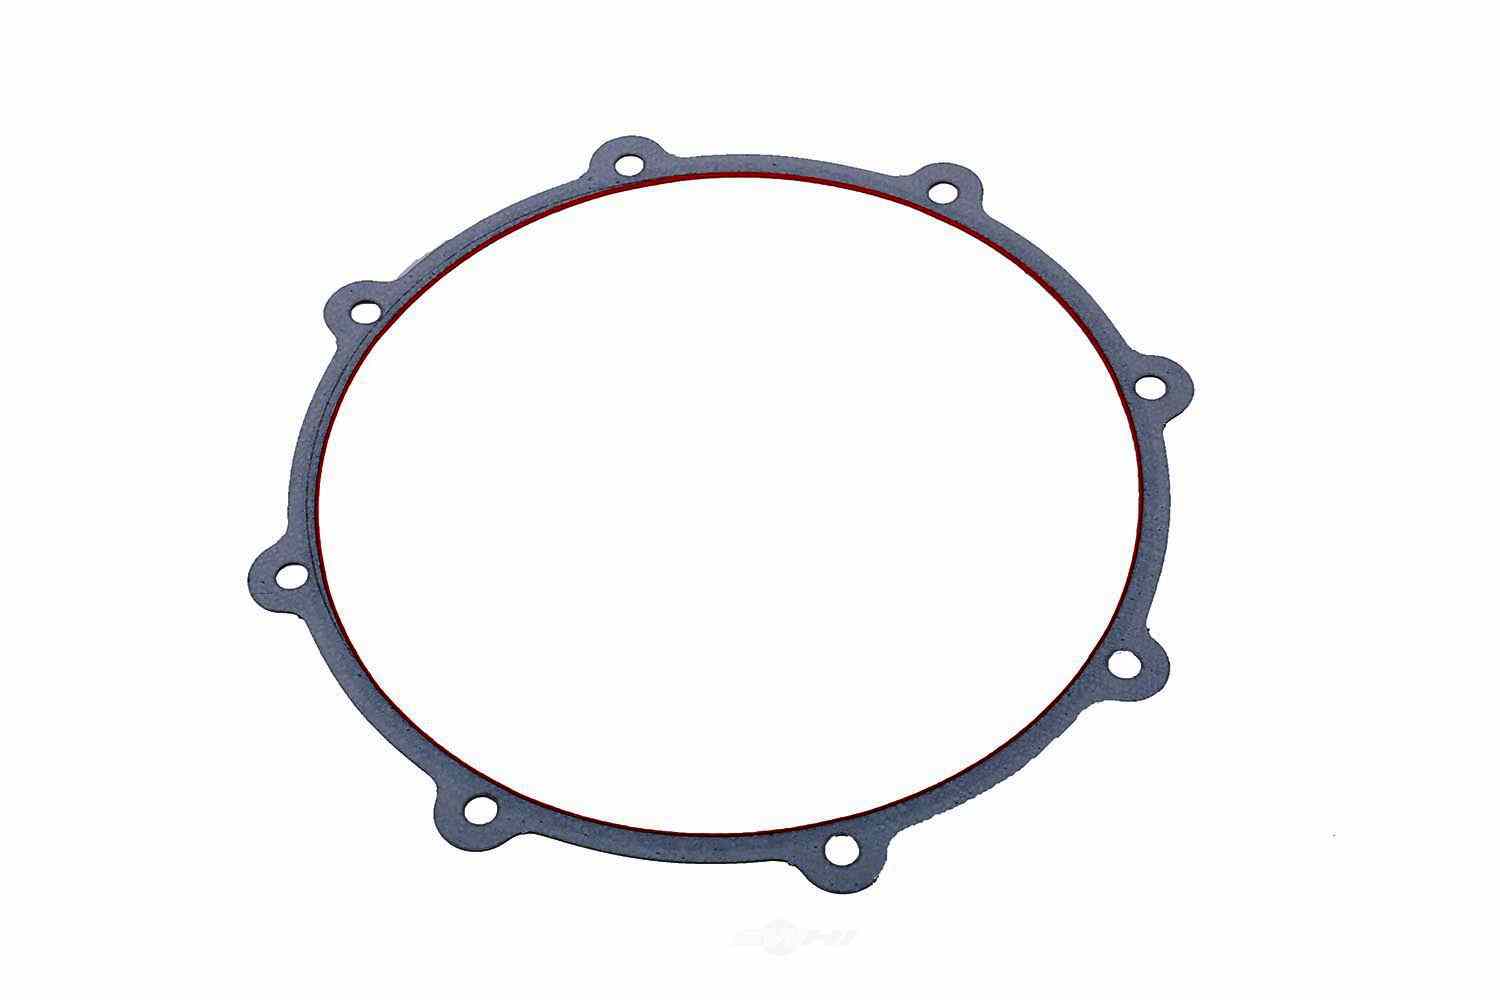 GM GENUINE PARTS - Differential Cover Gasket - GMP 89060114